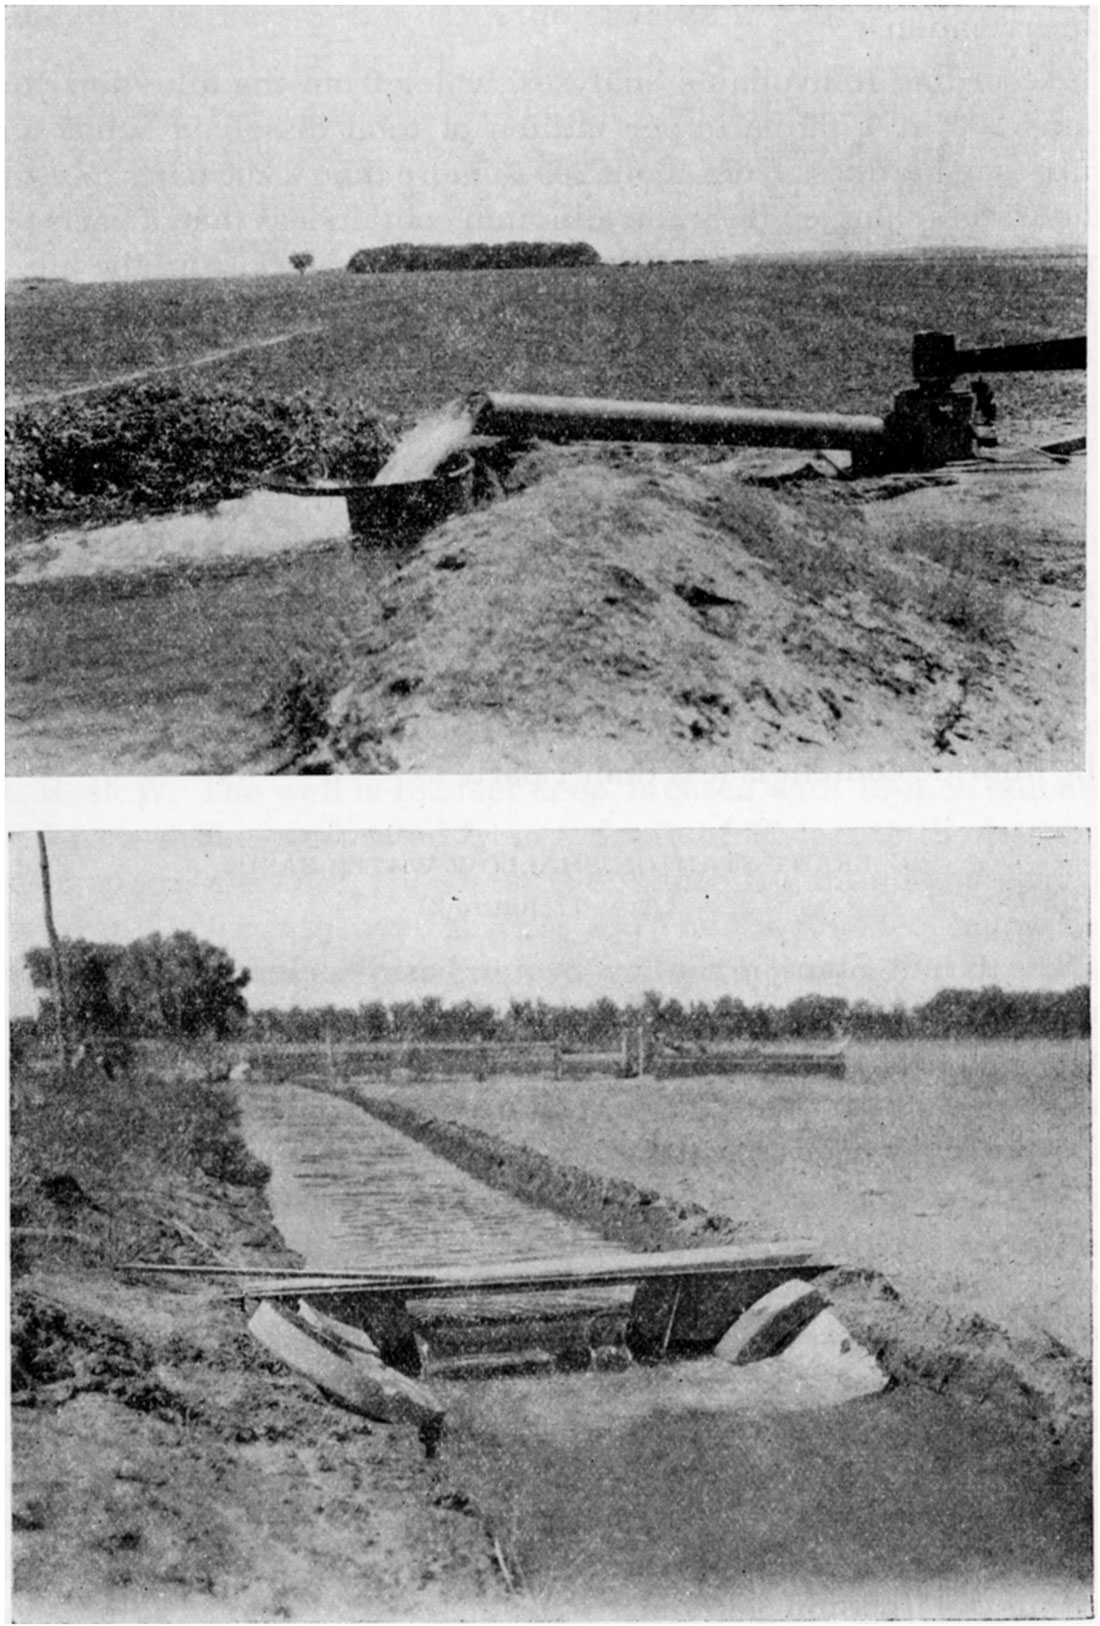 Black and white photos: upper is pumping water for irrigation in the Meade artesian basin; lower is measuring the flow of water obtained from shallow irrigation wells in the Arkansas valley near Dodge City.